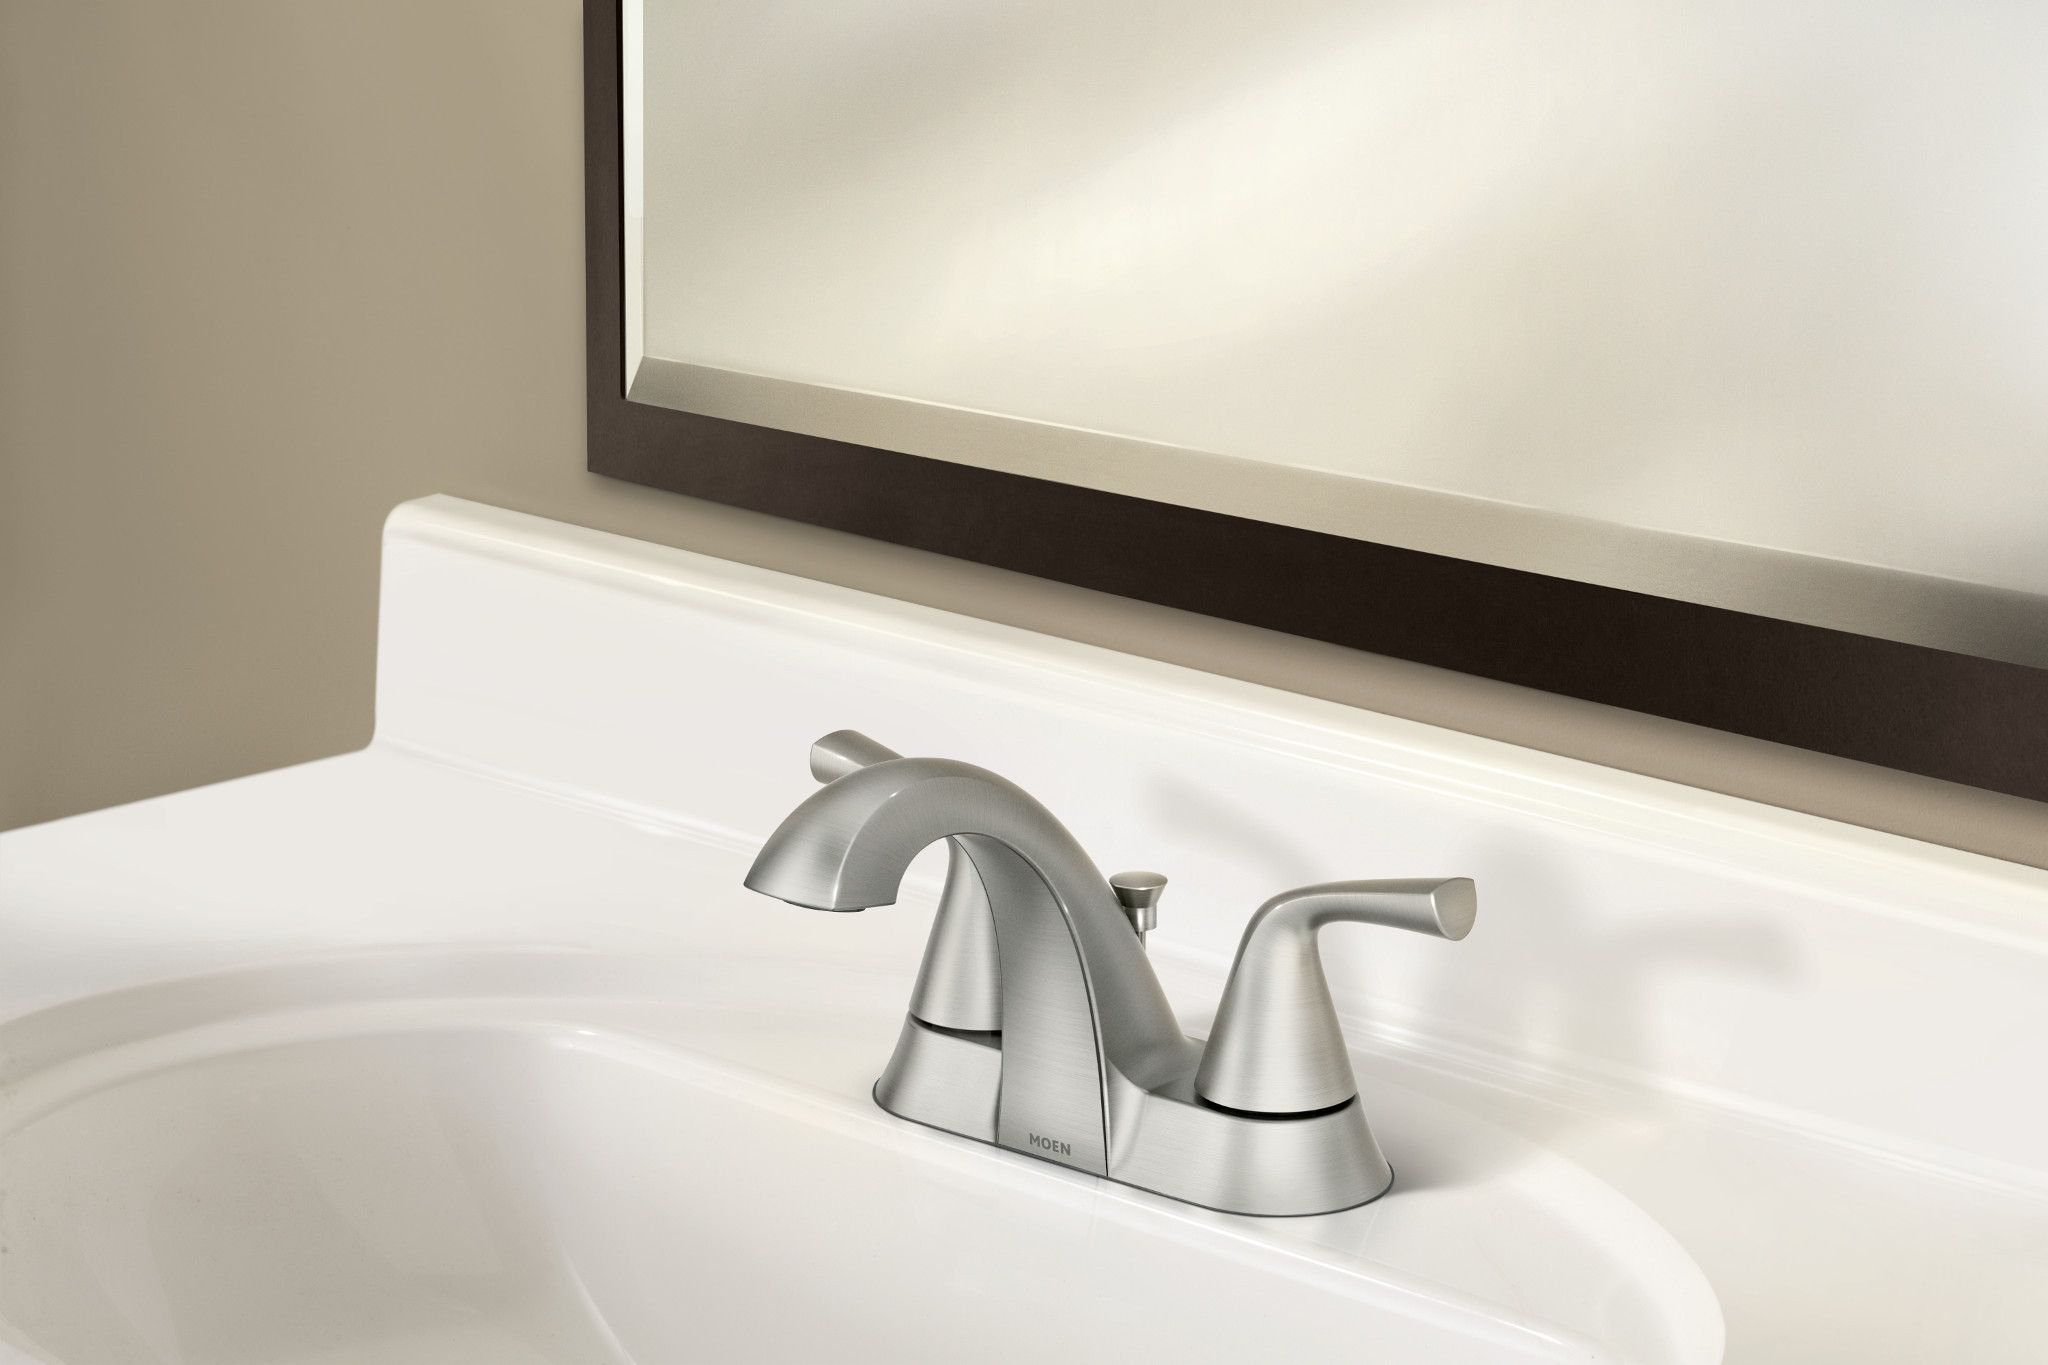 Moen Haber Centerset Lavatory Faucet with Drain Assembly & Reviews